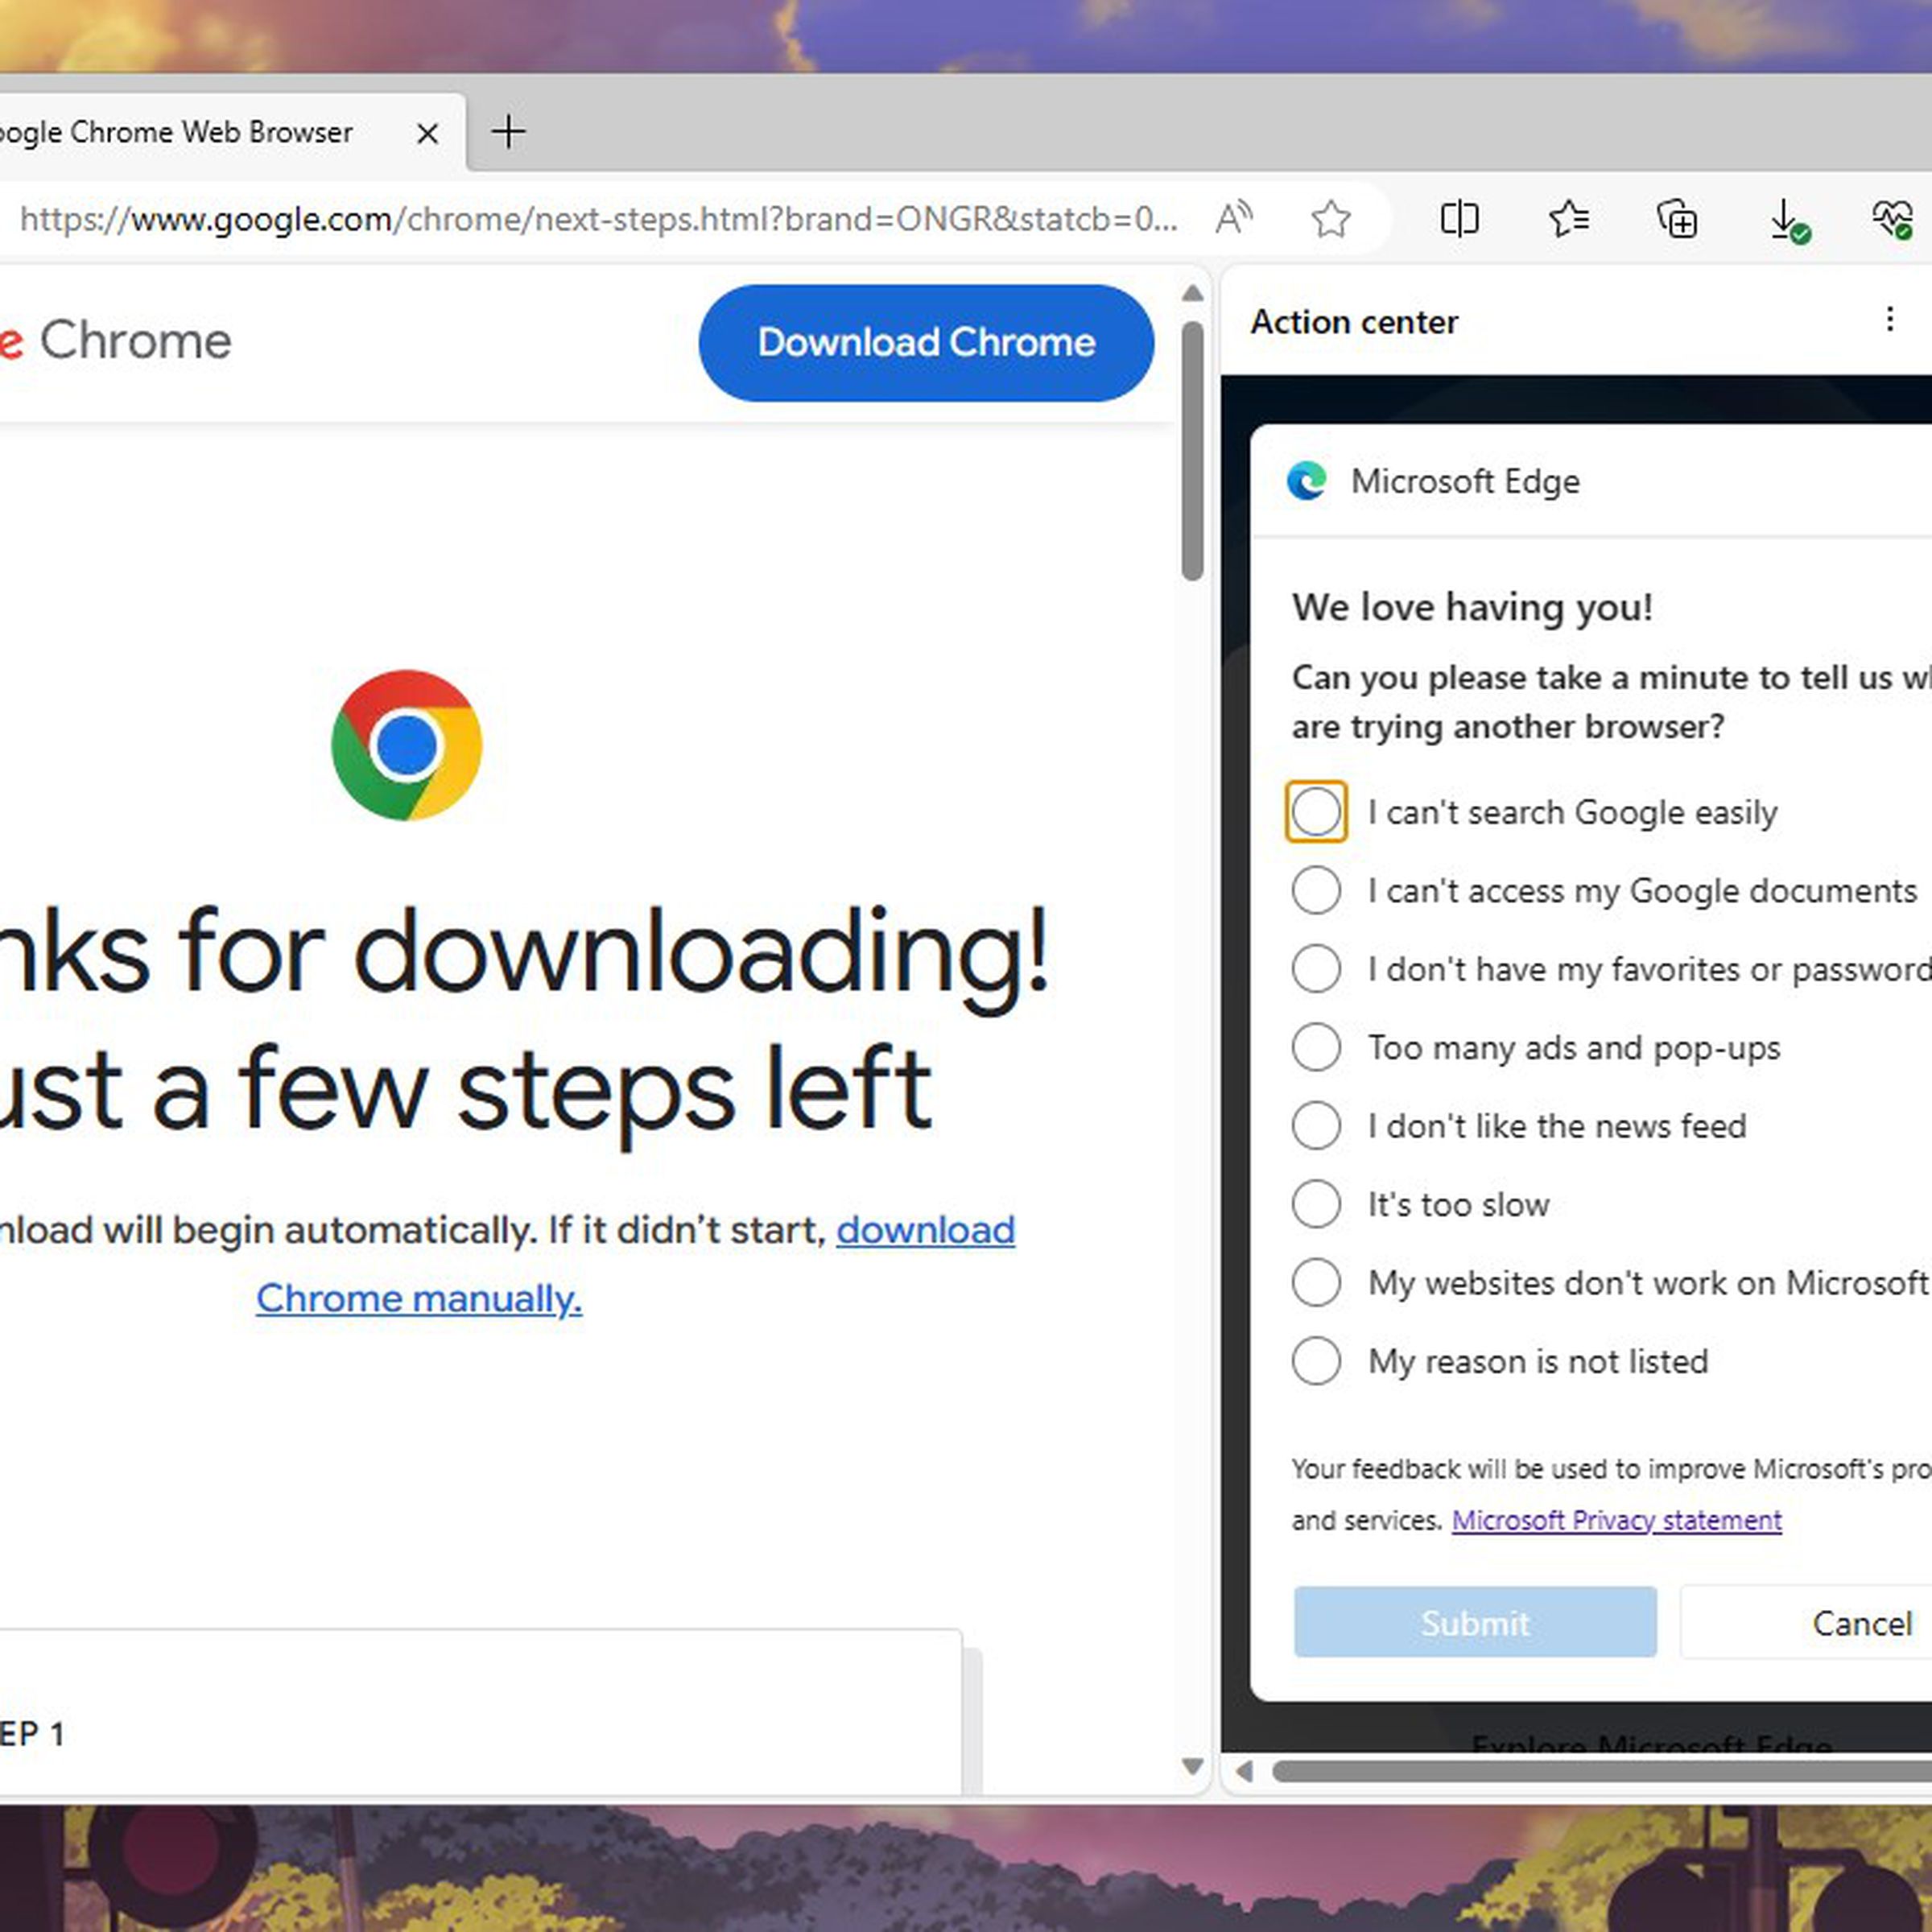 Microsoft Edge now pops up a poll after you press the “Download Chrome” button.